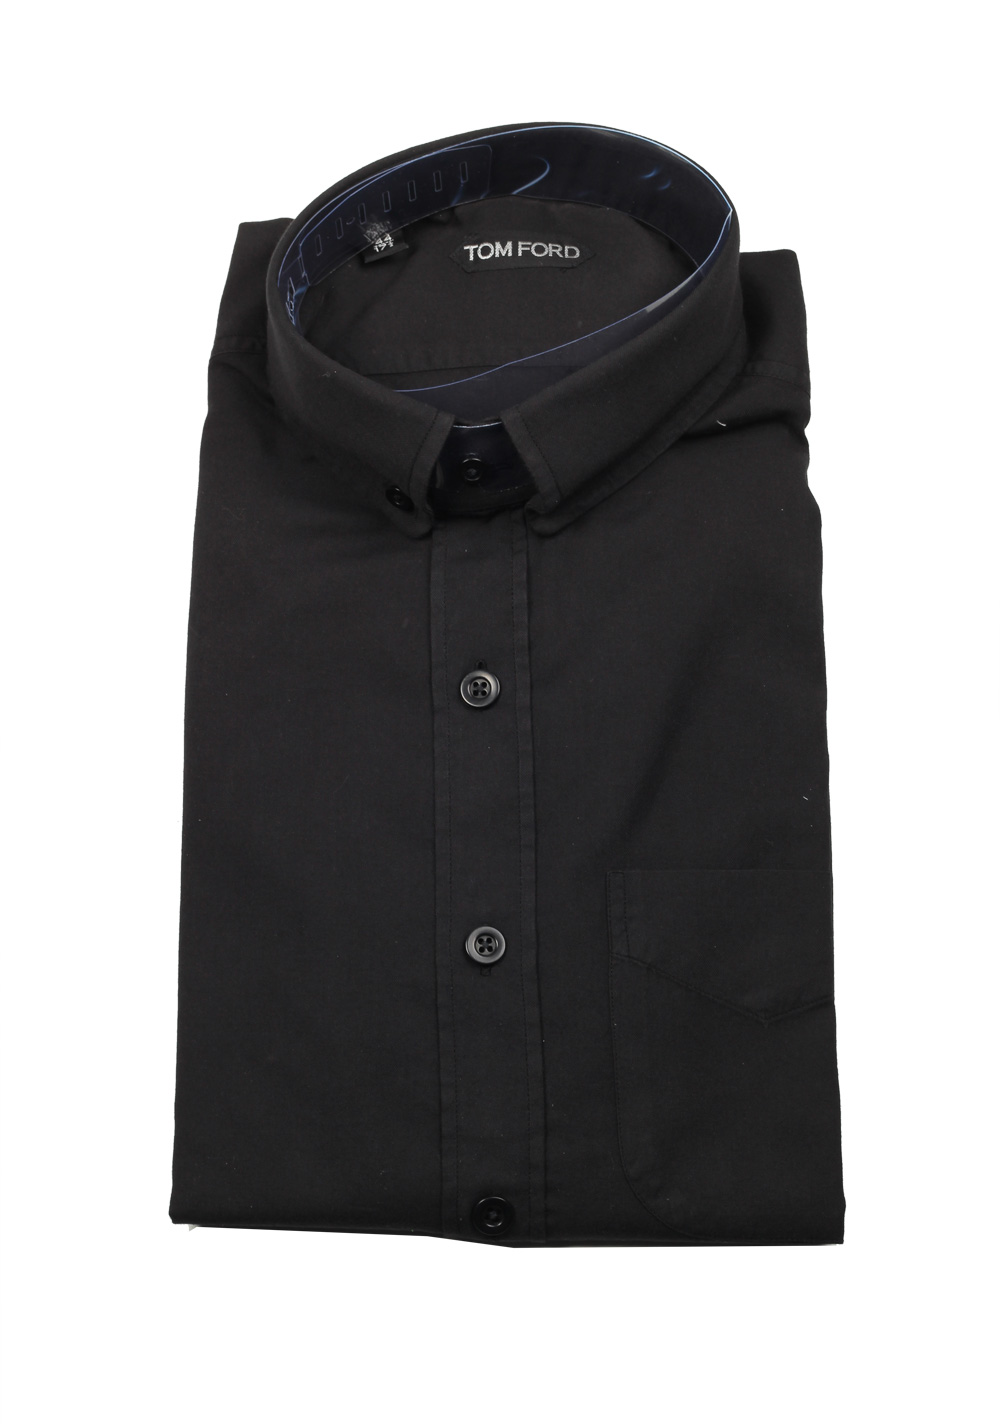 TOM FORD Solid Black Casual Button Down Shirt Size 44 / 17,5 U.S. | Costume Limité